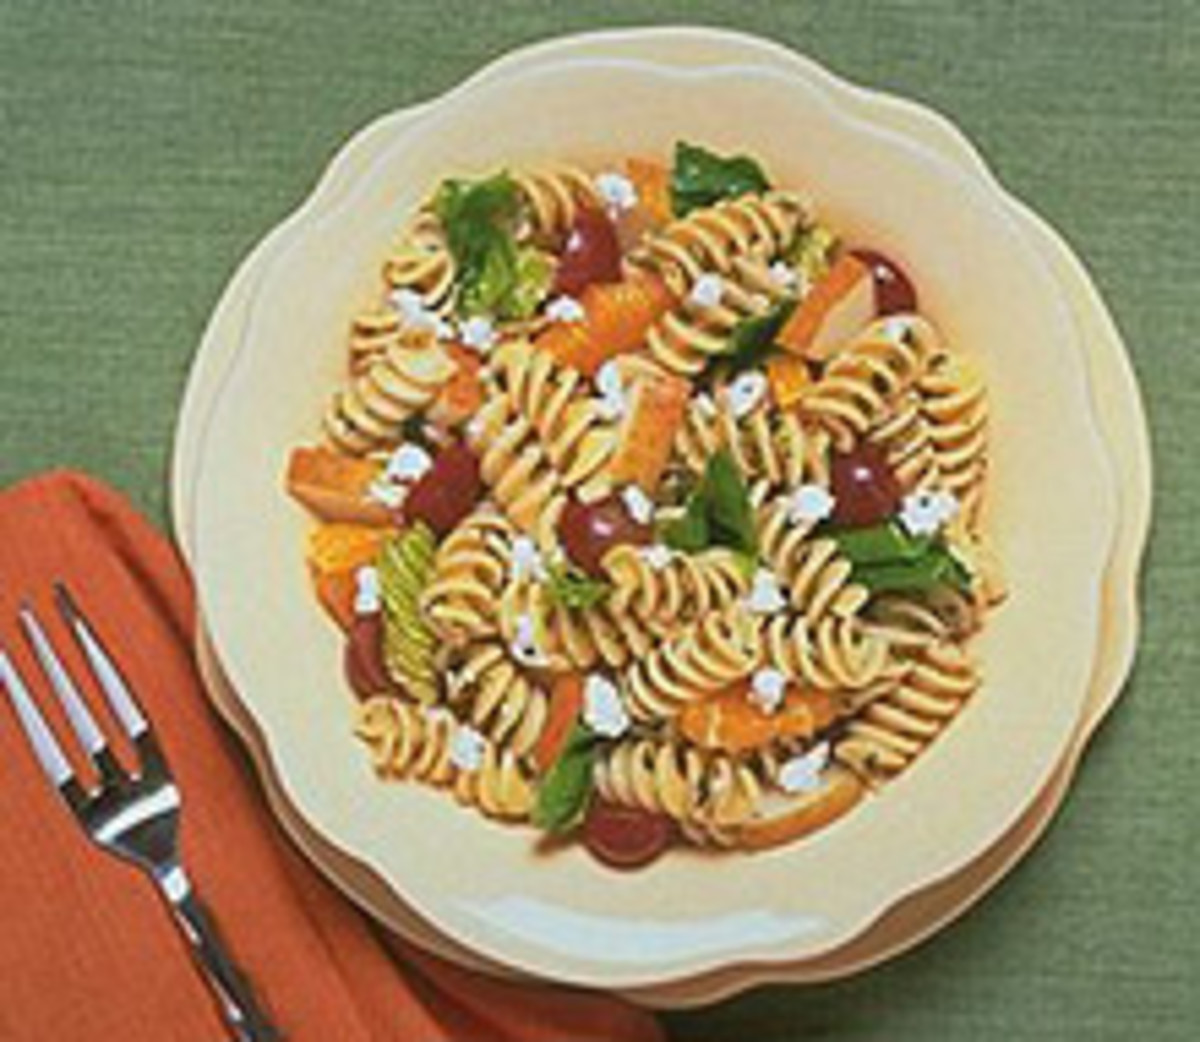 Minted Pasta and Fruit Salad